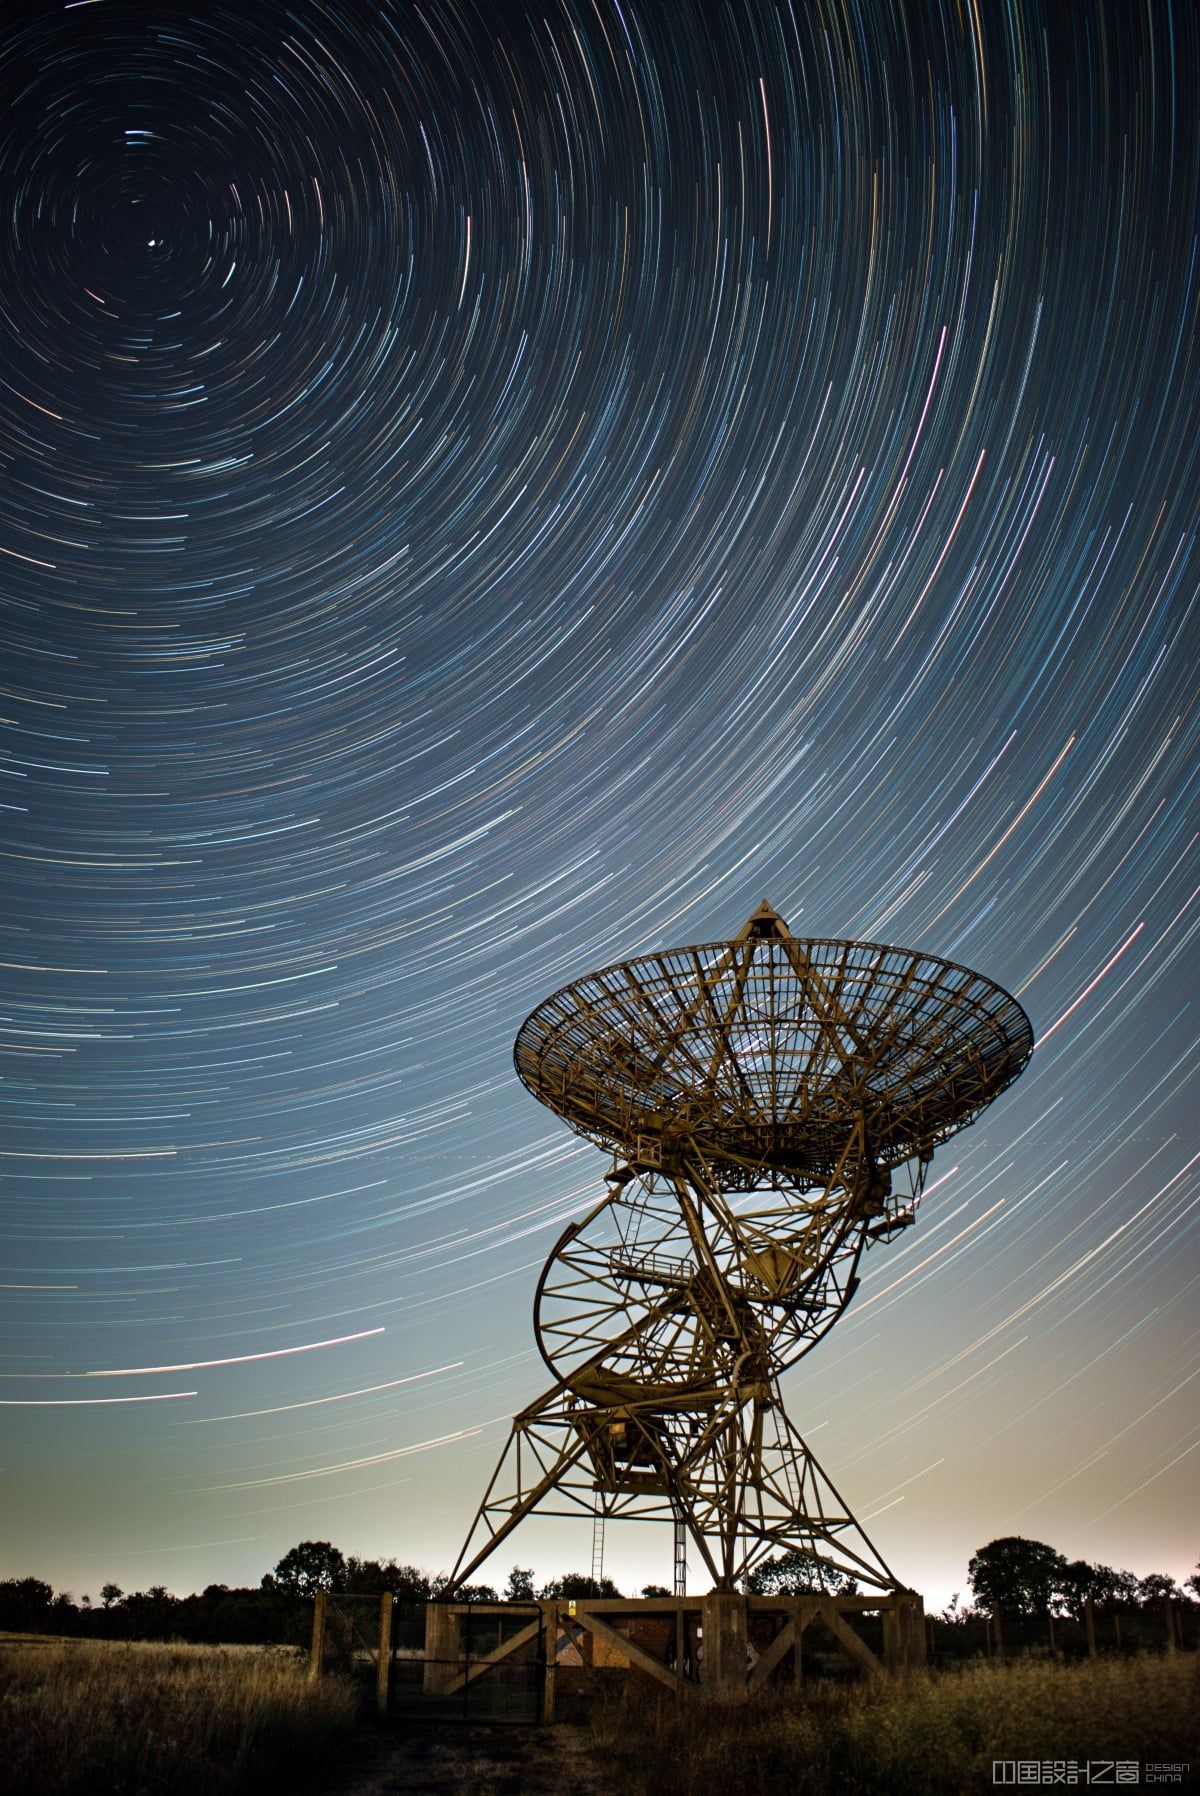 Star trails taken over a deactivated radio telescope antenna